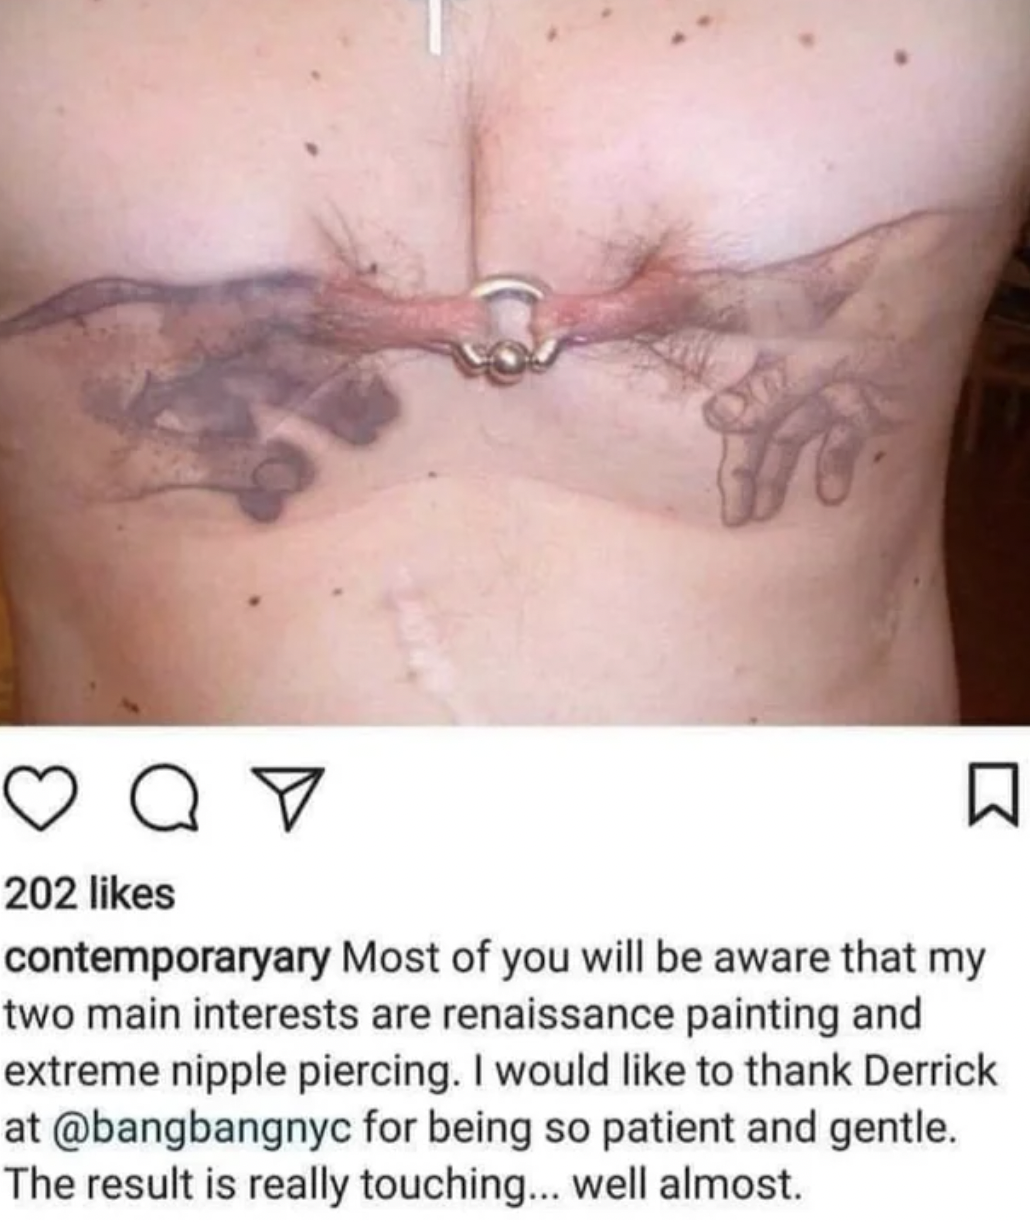 chest -Most of you will be aware that my two main interests are renaissance painting and extreme nipple piercing. I would to thank Derrick at for being so patient and gentle. The result is really touching... well almost.